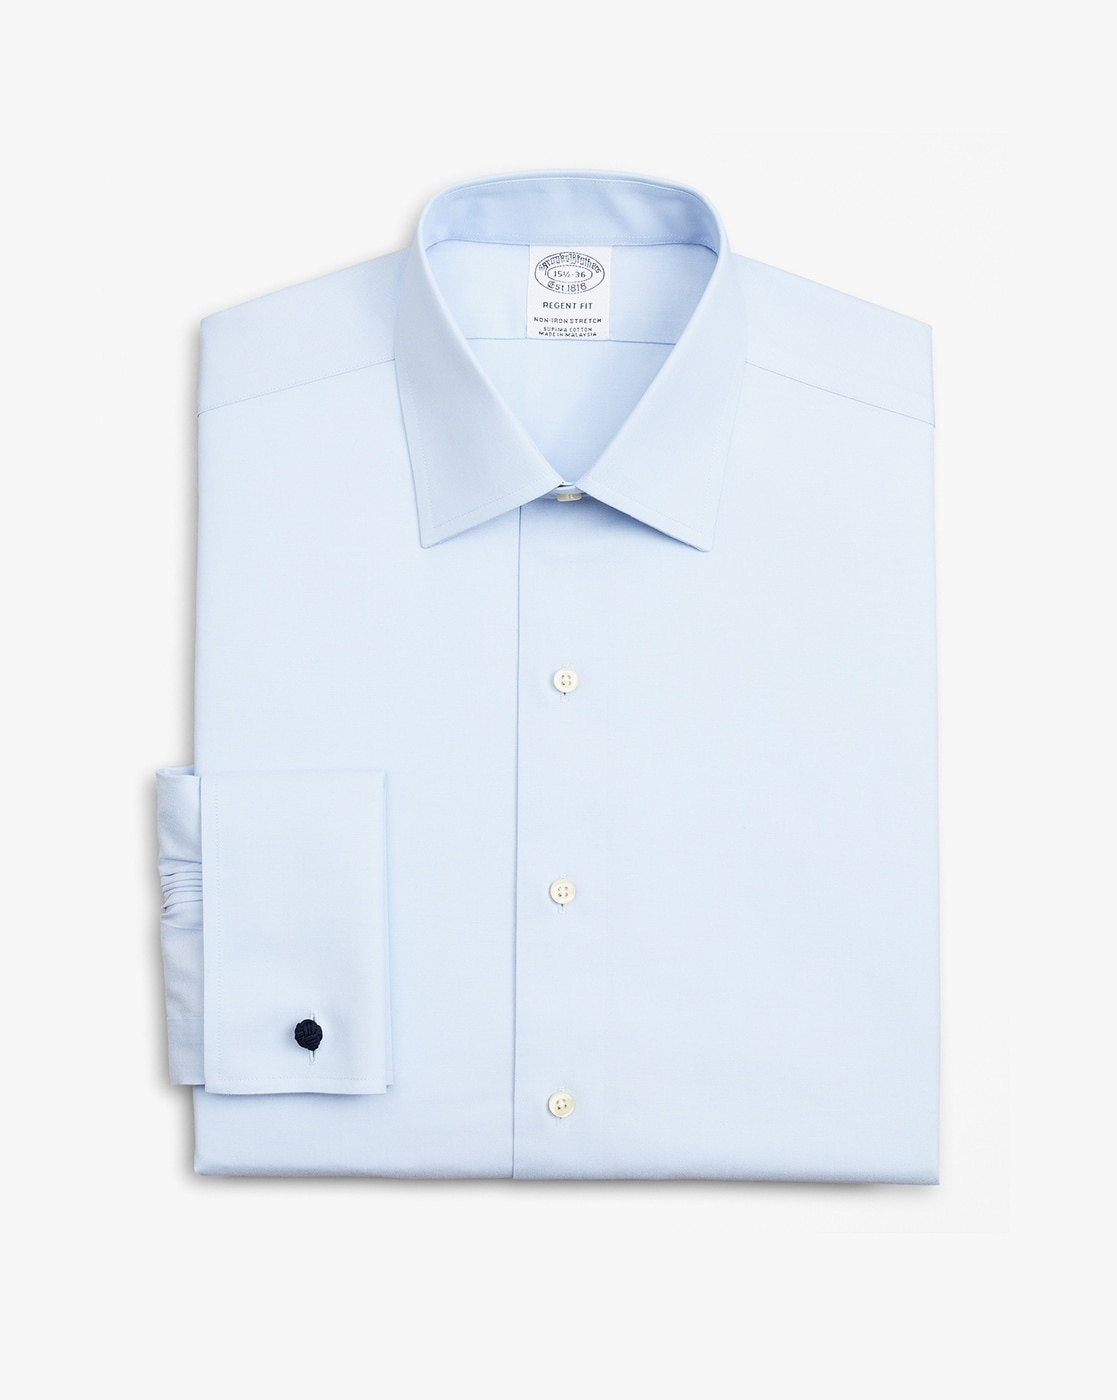 Regent Blue Pinstriped with White Collar Royal Oxford Shirt | Oxford shirt,  Cotton shirts for men, Pinstripe